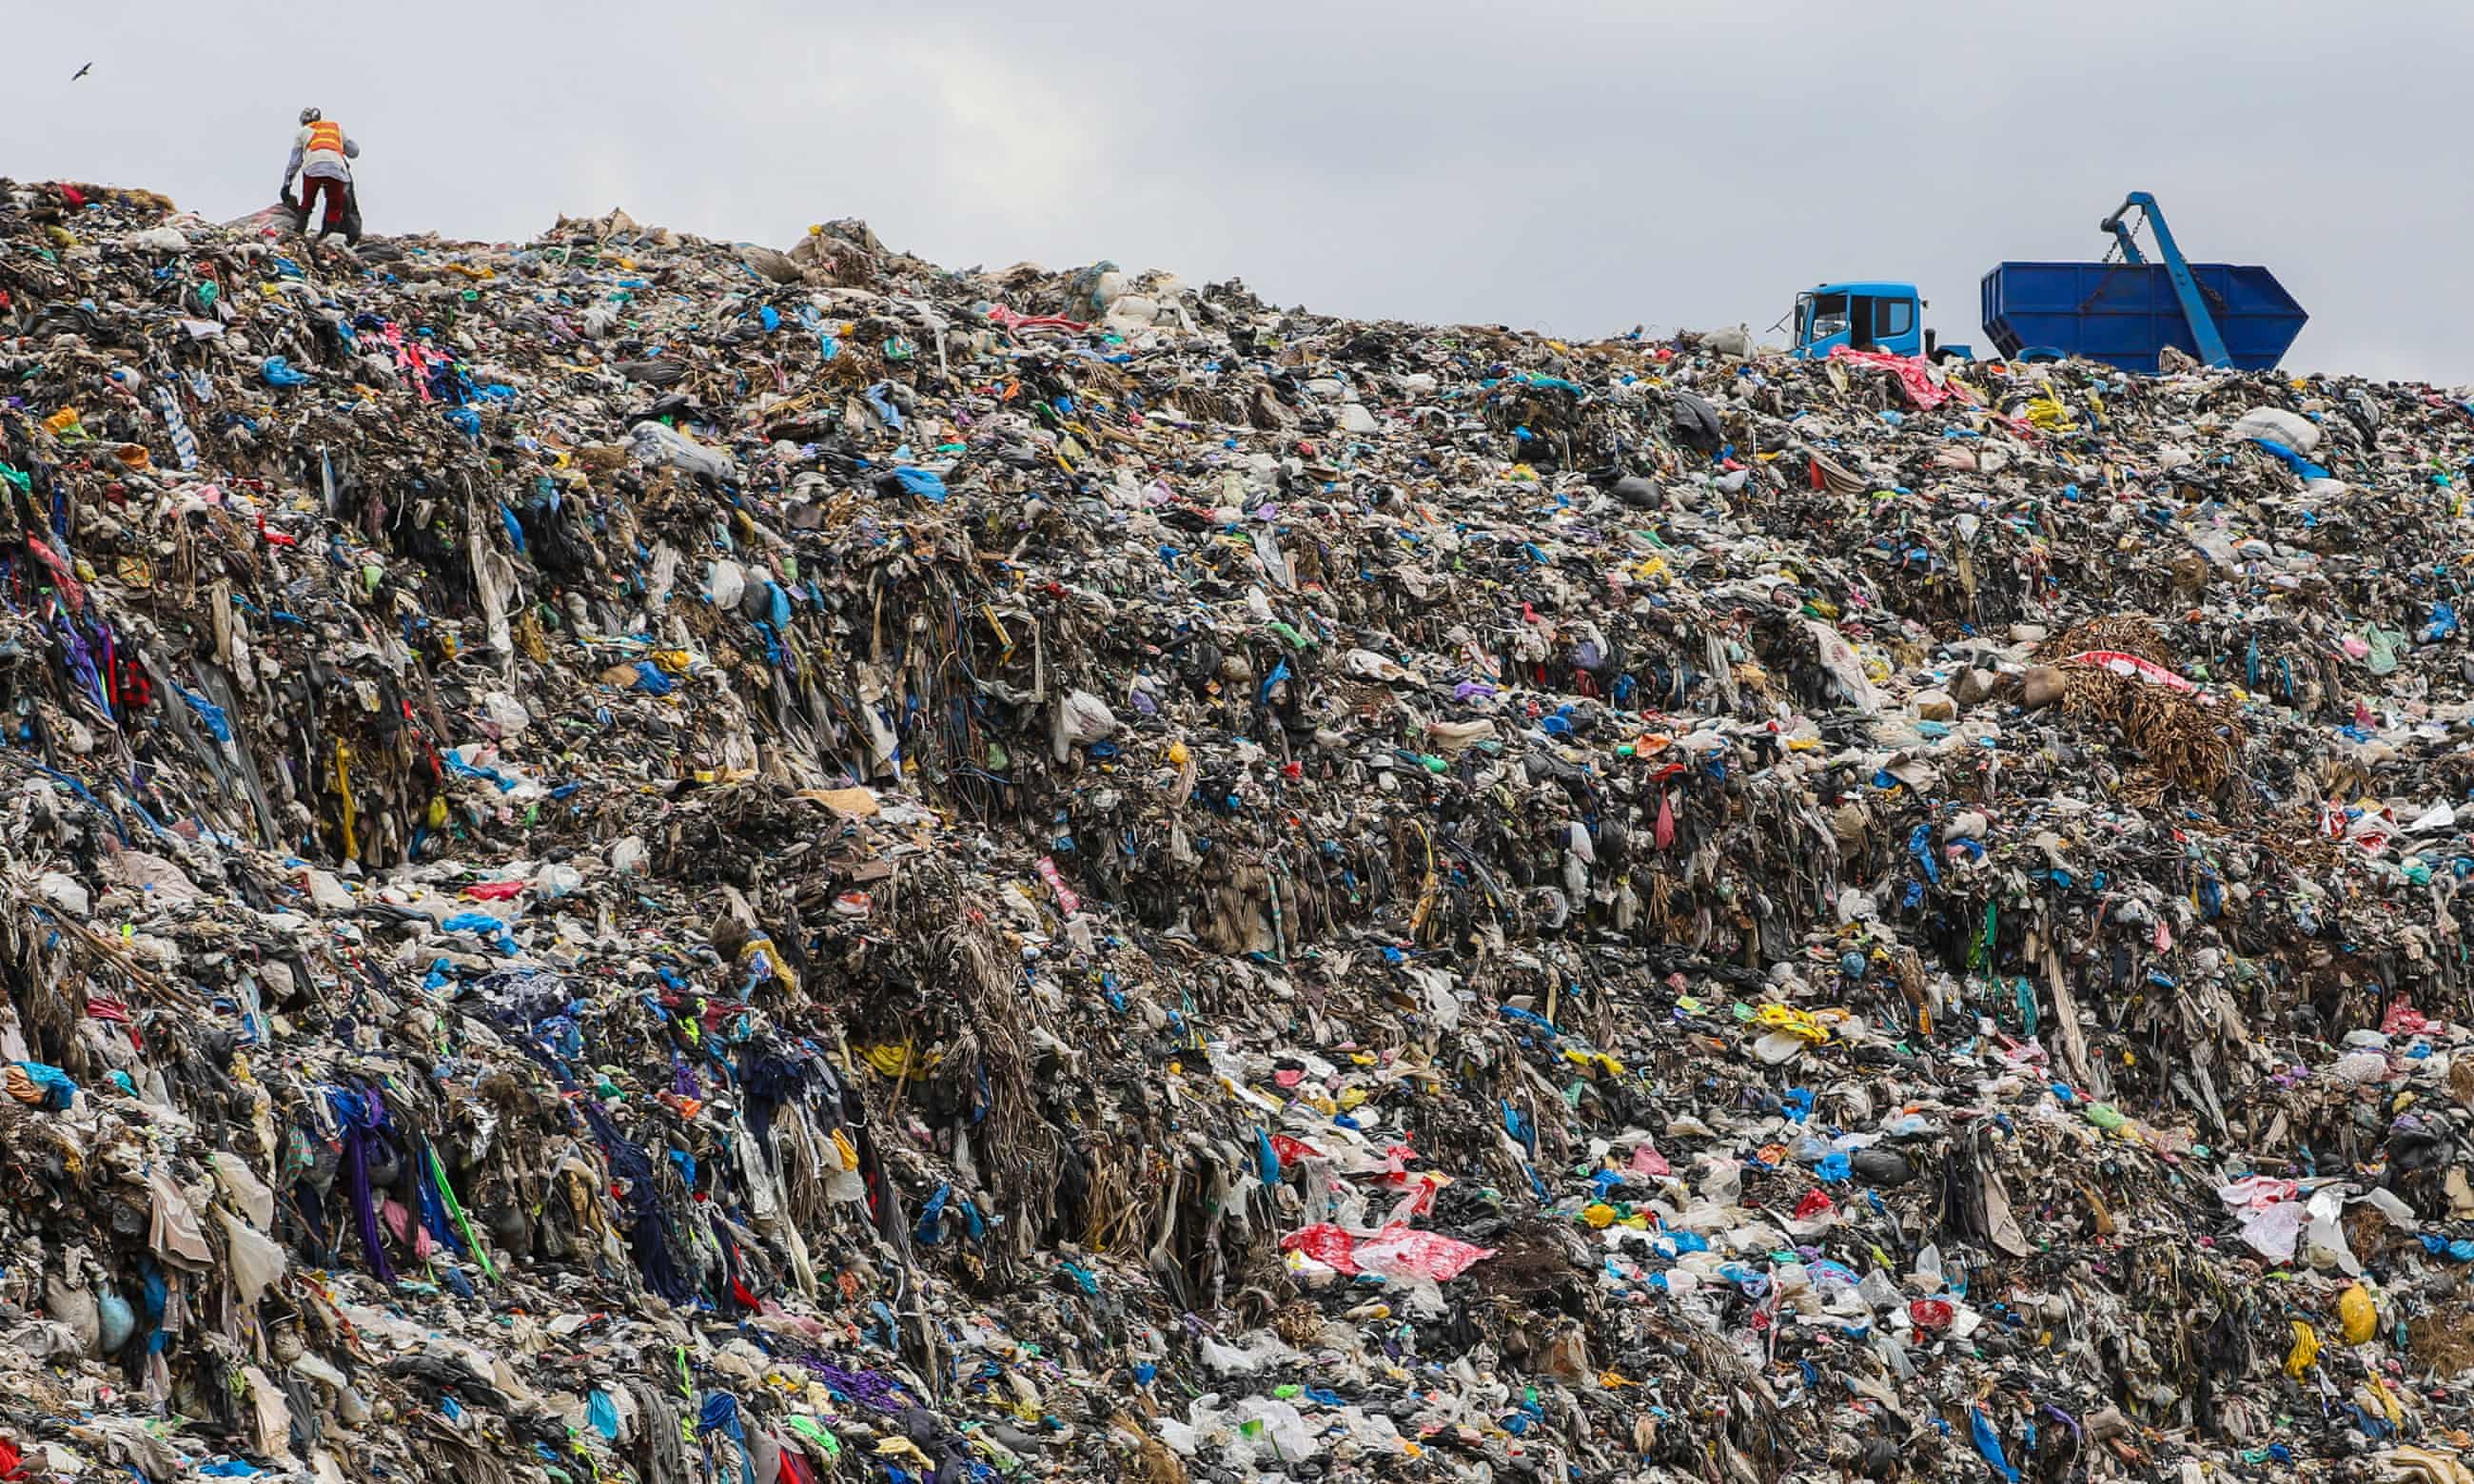 Shouldering the burden … a mountain of waste at the Kpone landfill site in Tema, Ghana. Photograph: Nipah Dennis/Bloomberg/Getty Images